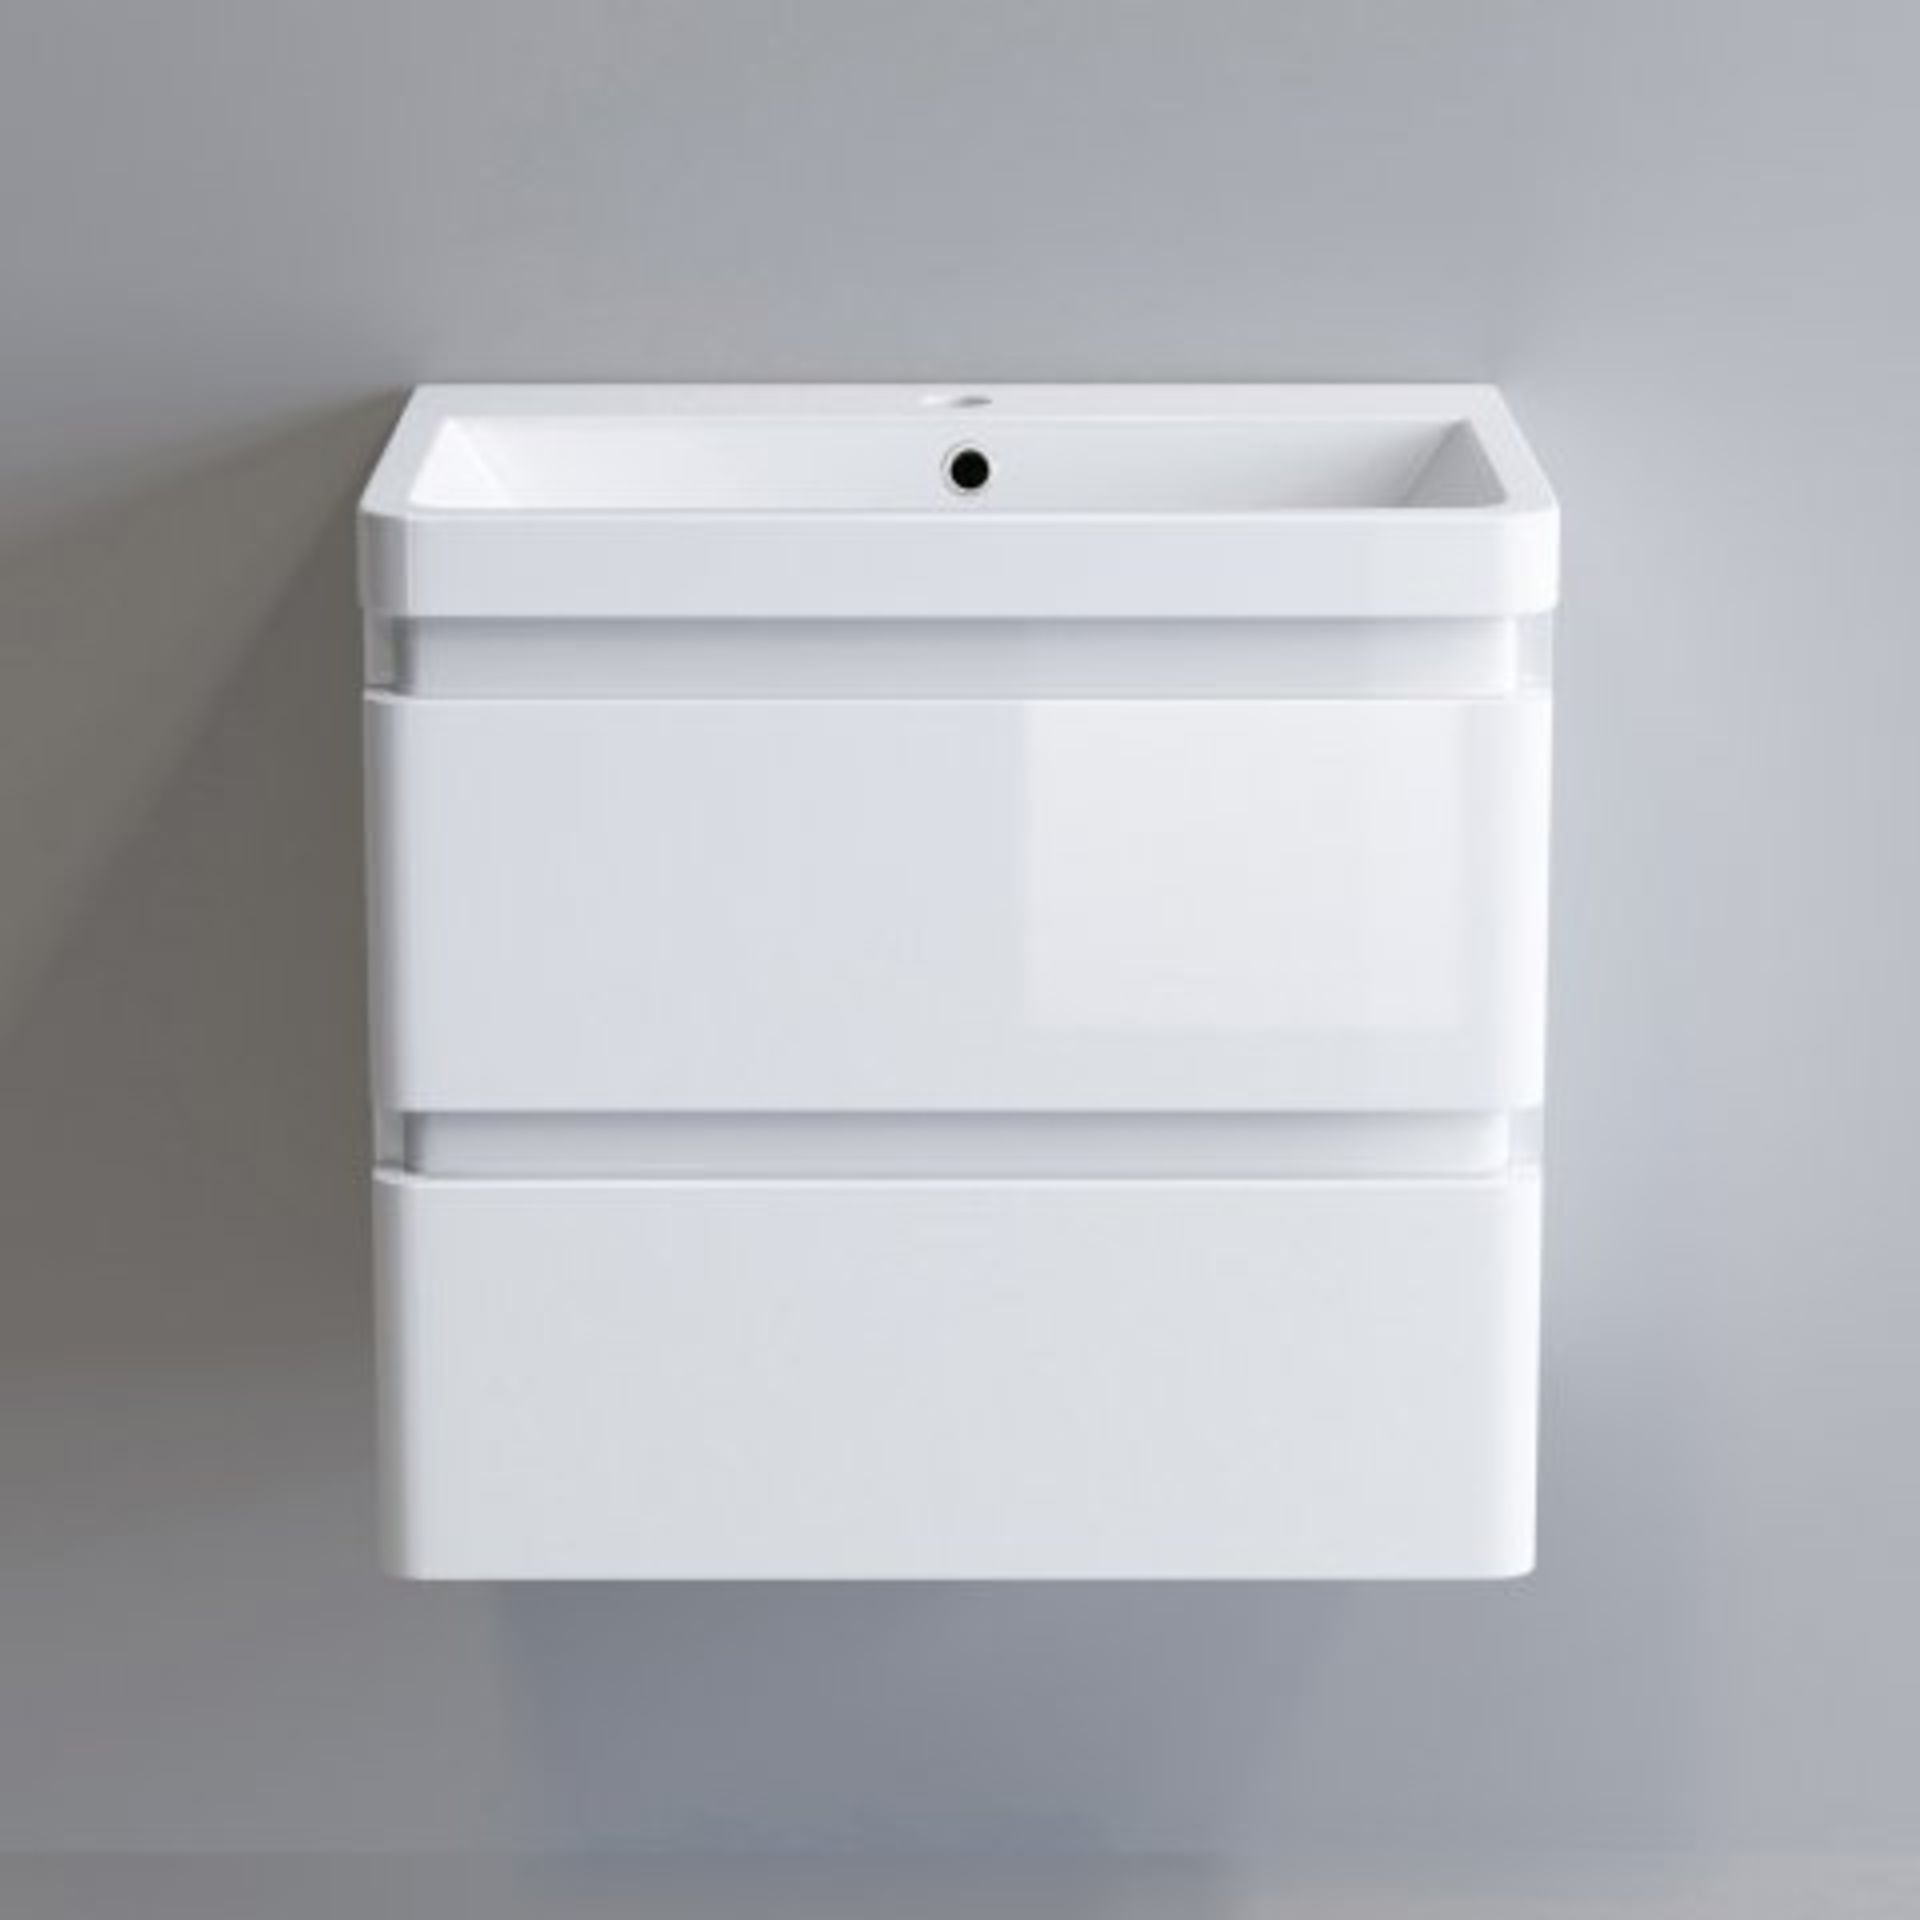 (L75) 600mm Denver II Gloss White Built In Basin Drawer Unit - Wall Hung. RRP £599.99. COMES - Image 3 of 4